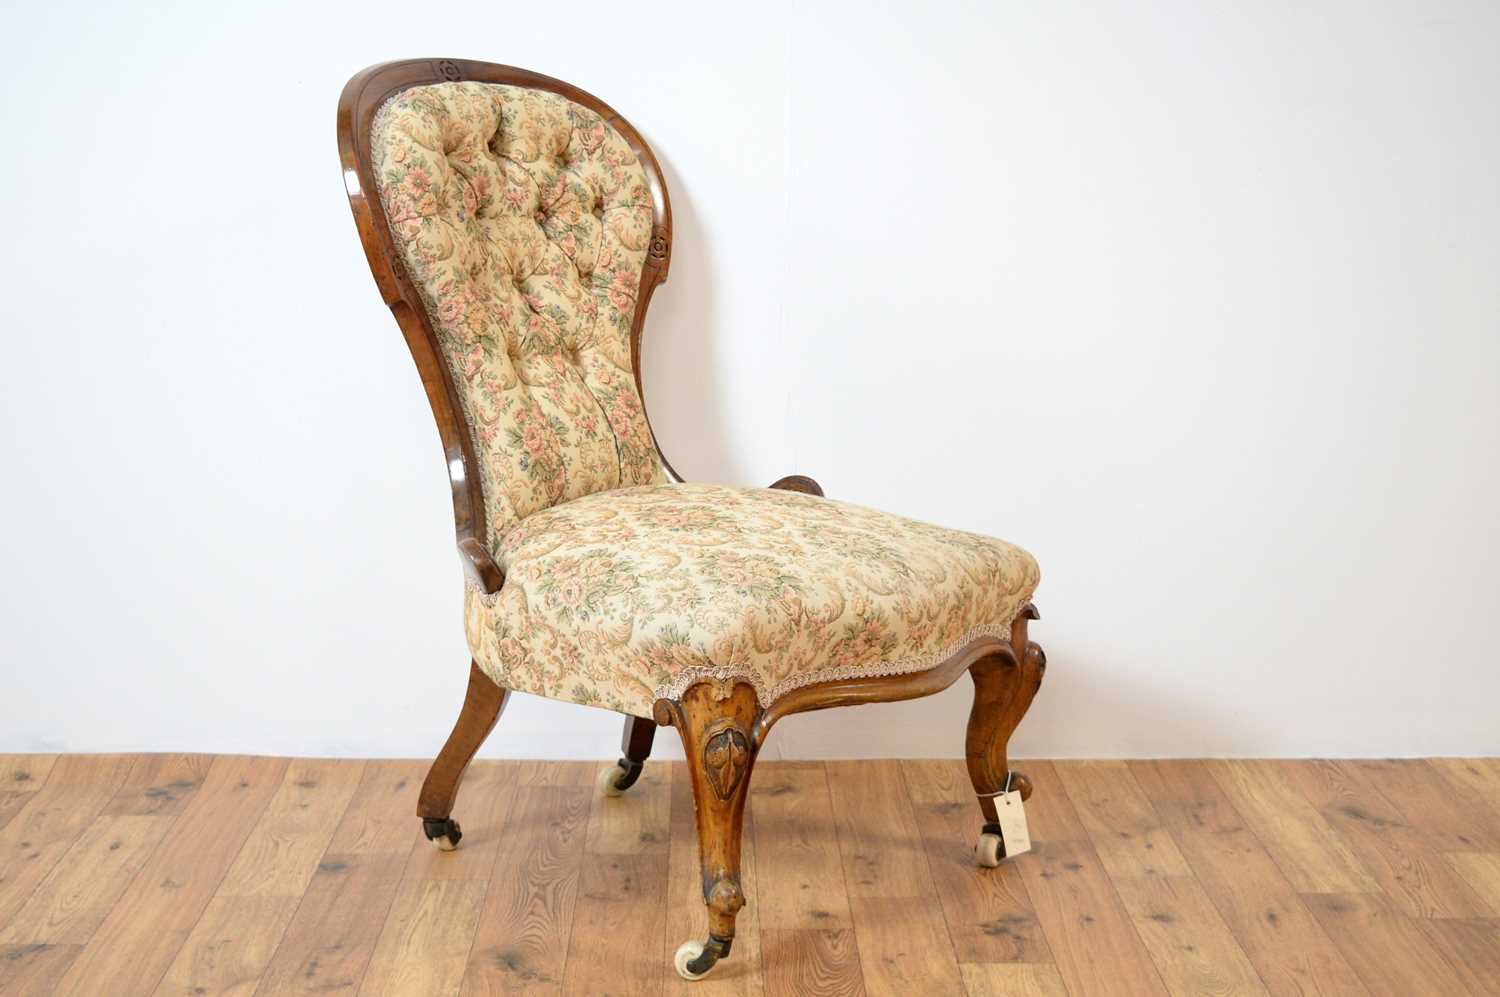 A 19th Century Victorian spoonback mahogany framed salon chair - Image 3 of 3